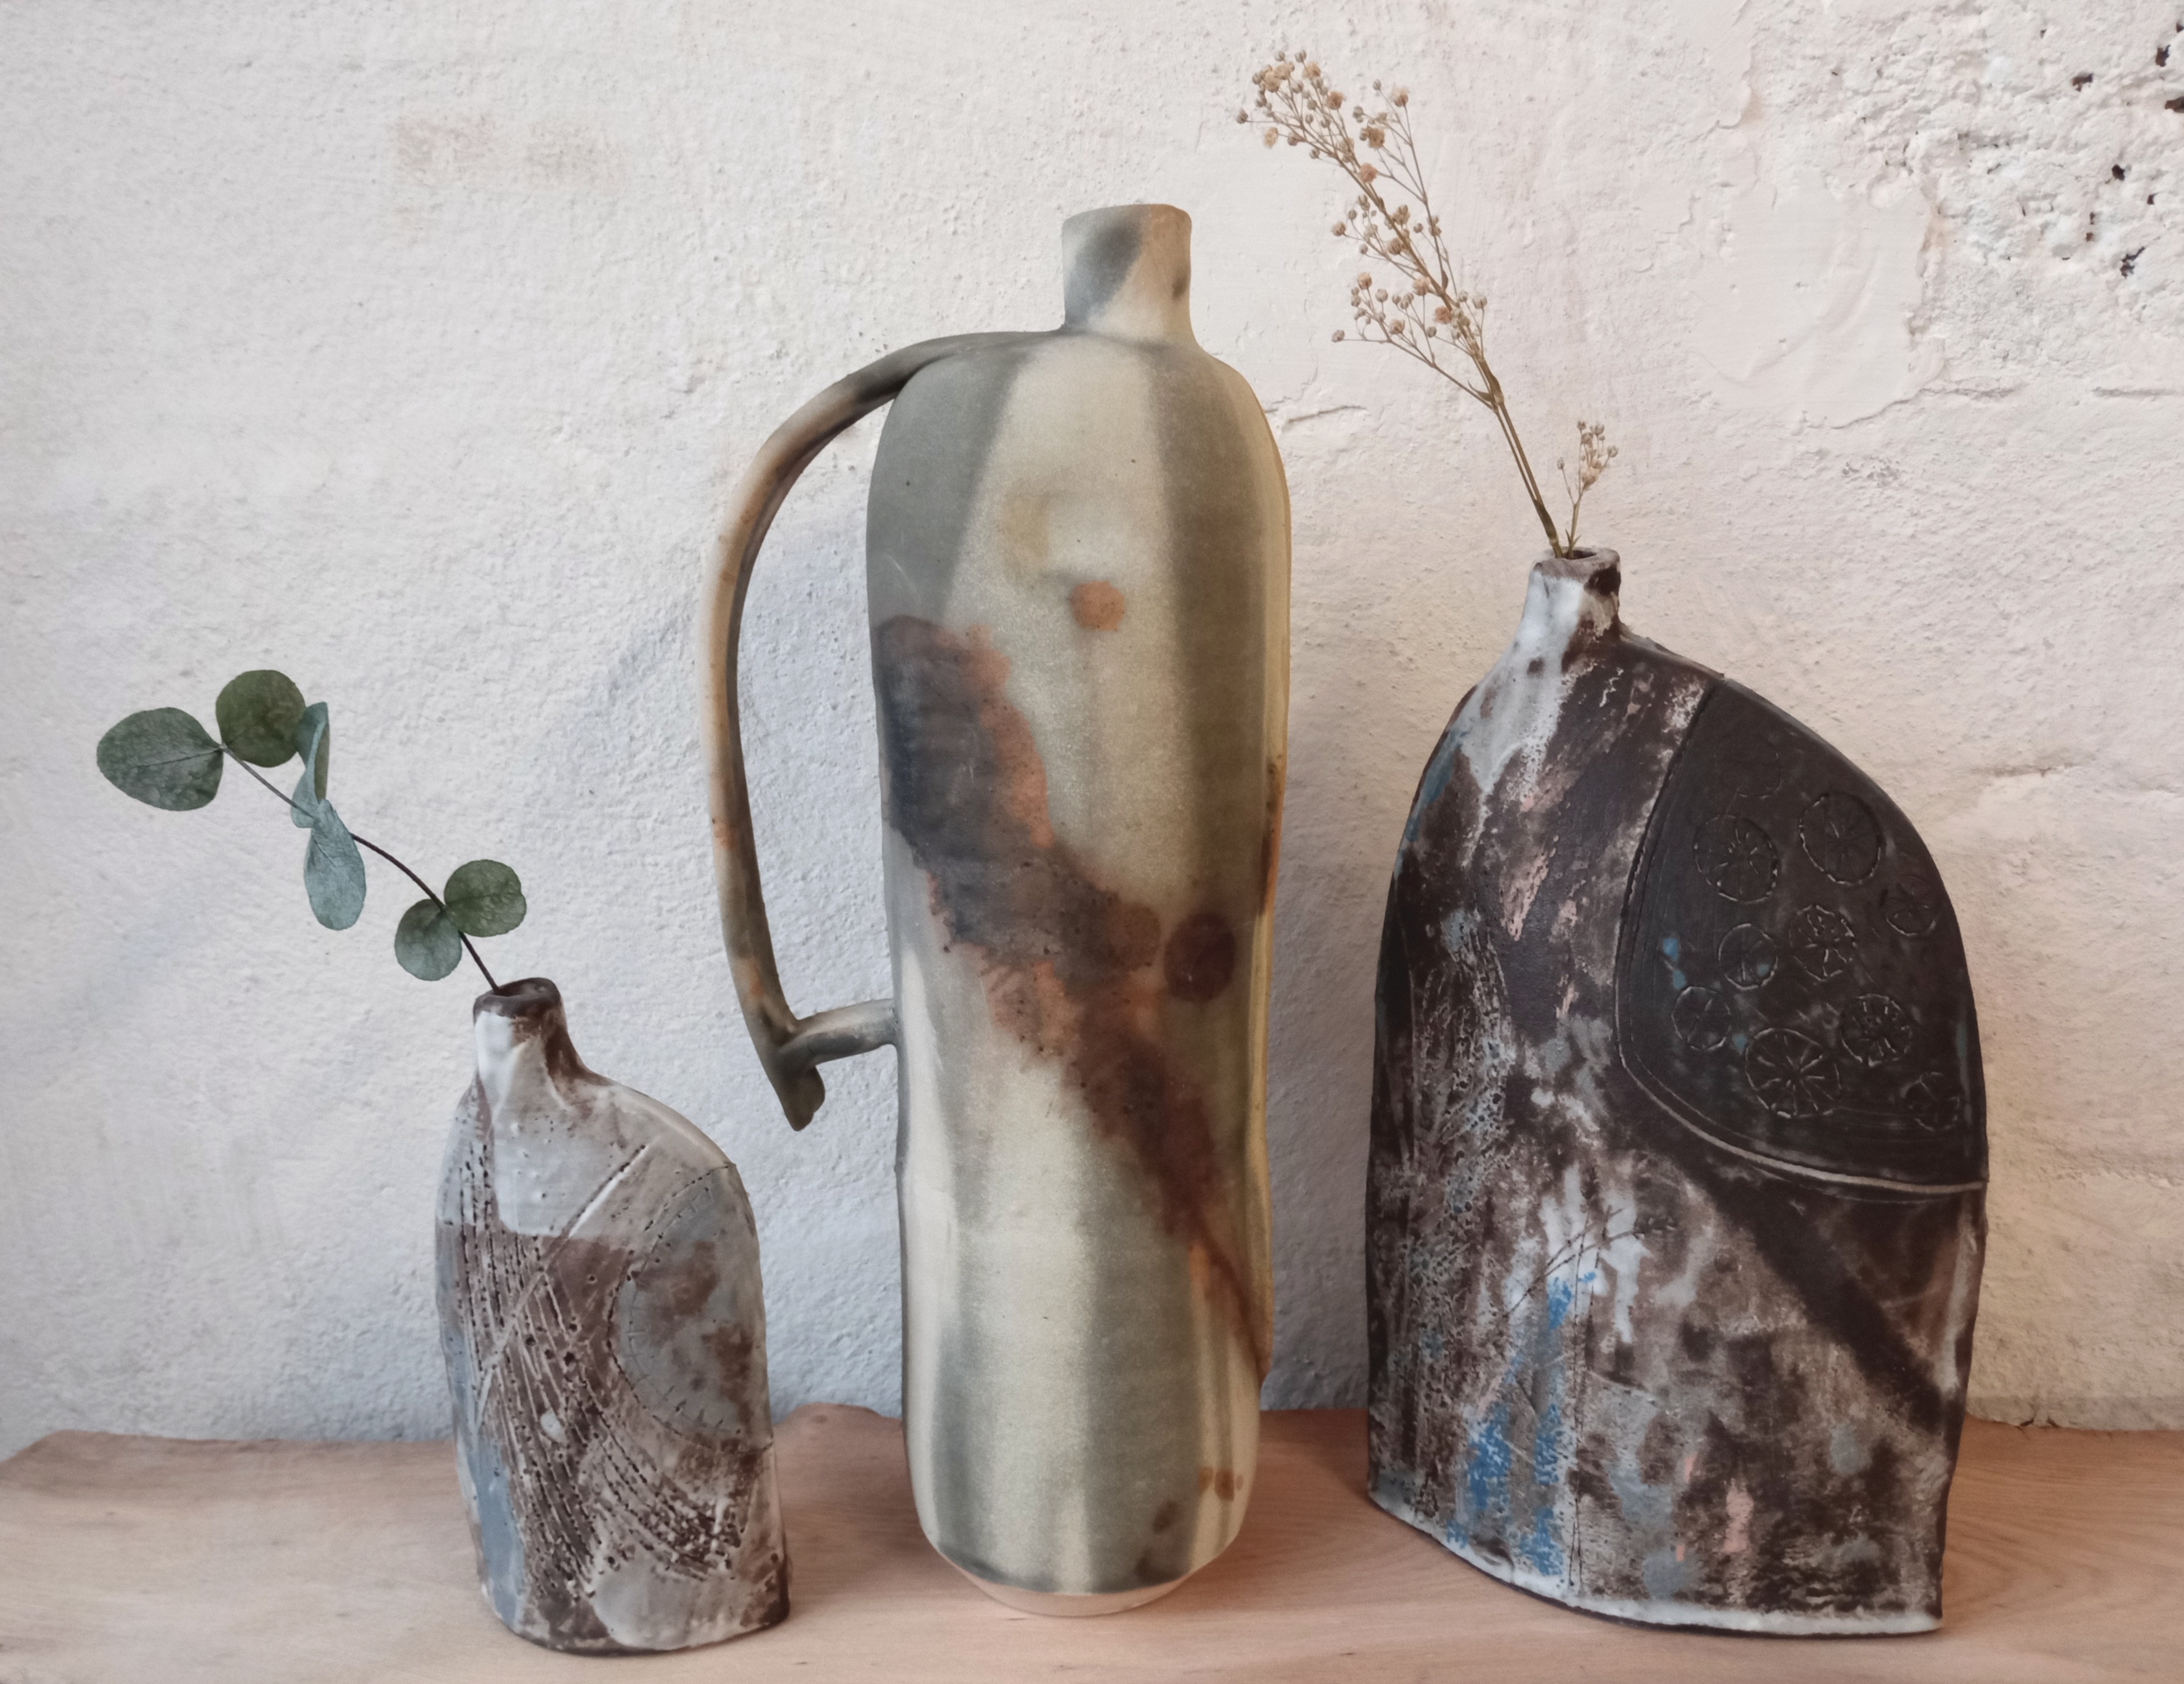 Texture and ash glazed bottles